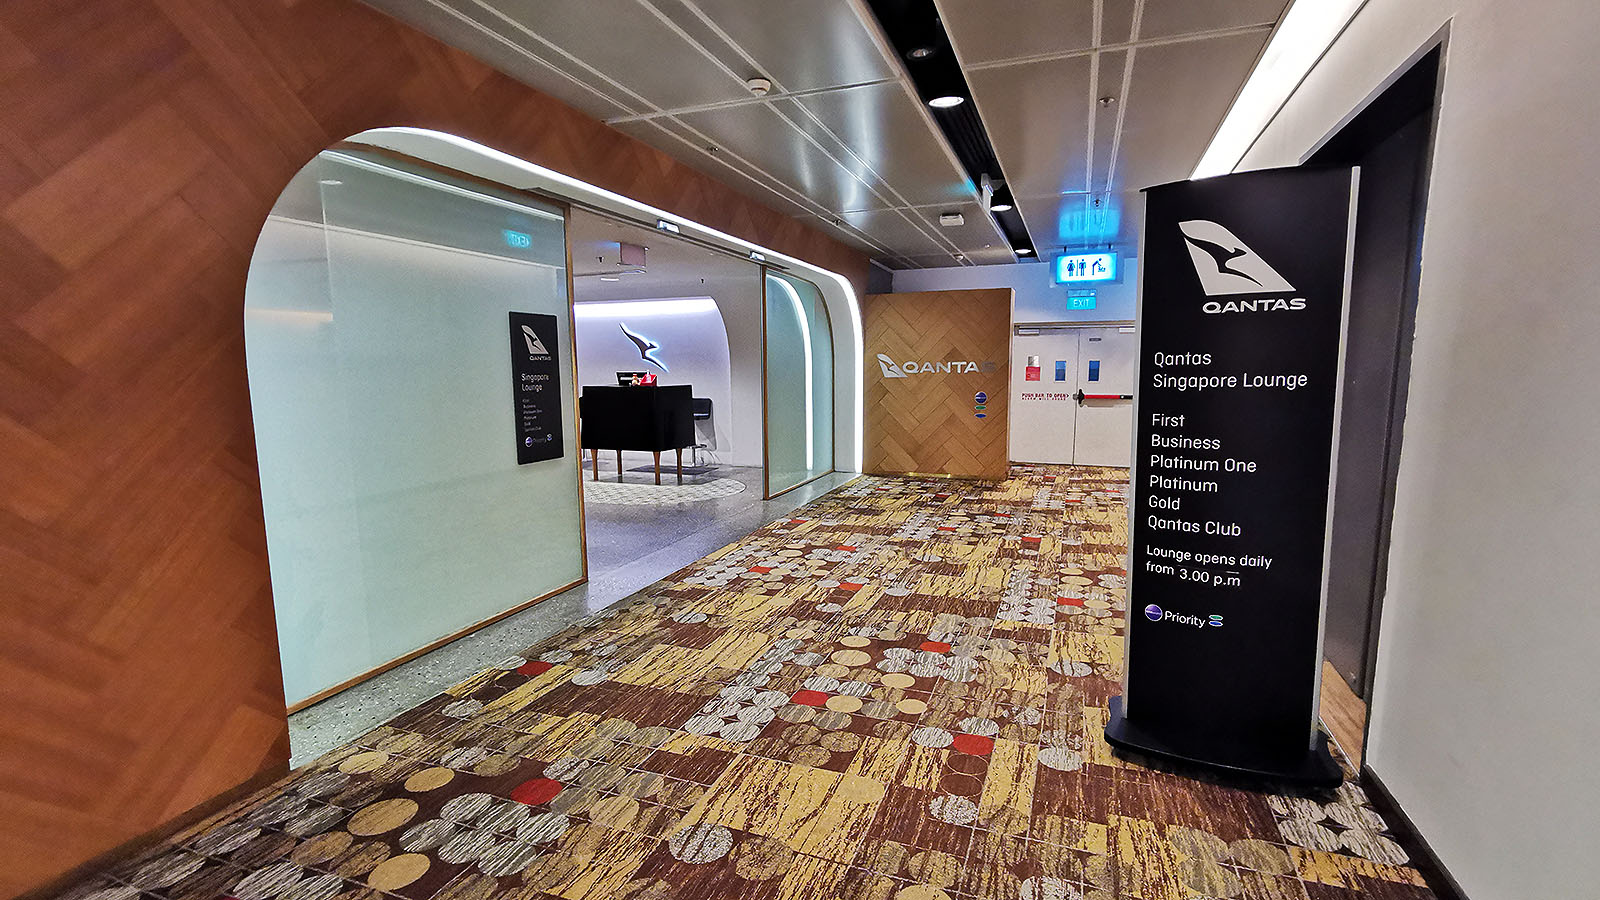 Entry to the Qantas International Business Lounge in Singapore